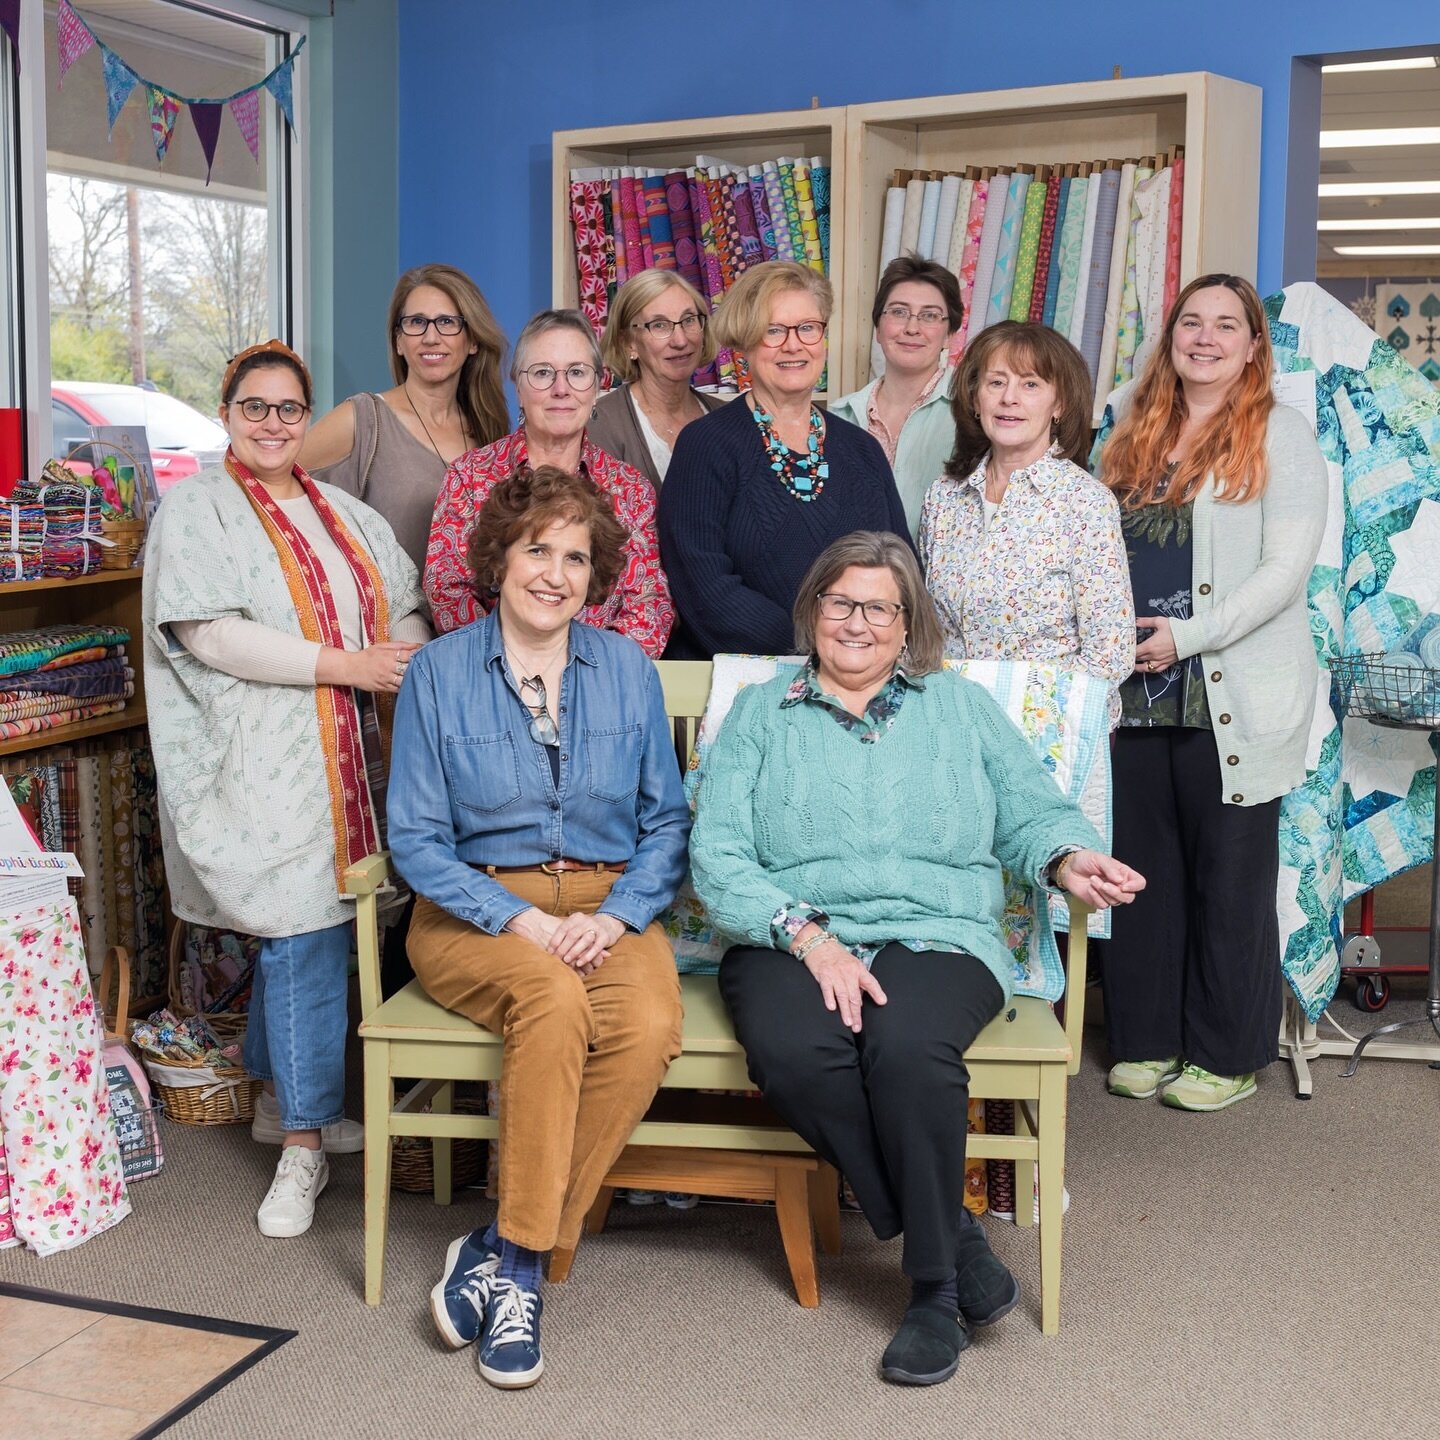 I recently got to photograph the wonderful team at @pennington_quilts for @quiltfolk - a super beautiful quilting magazine! Loved getting to explore this colorful shop, photograph the owner and her great team and work with the awesome team at Quiltfo